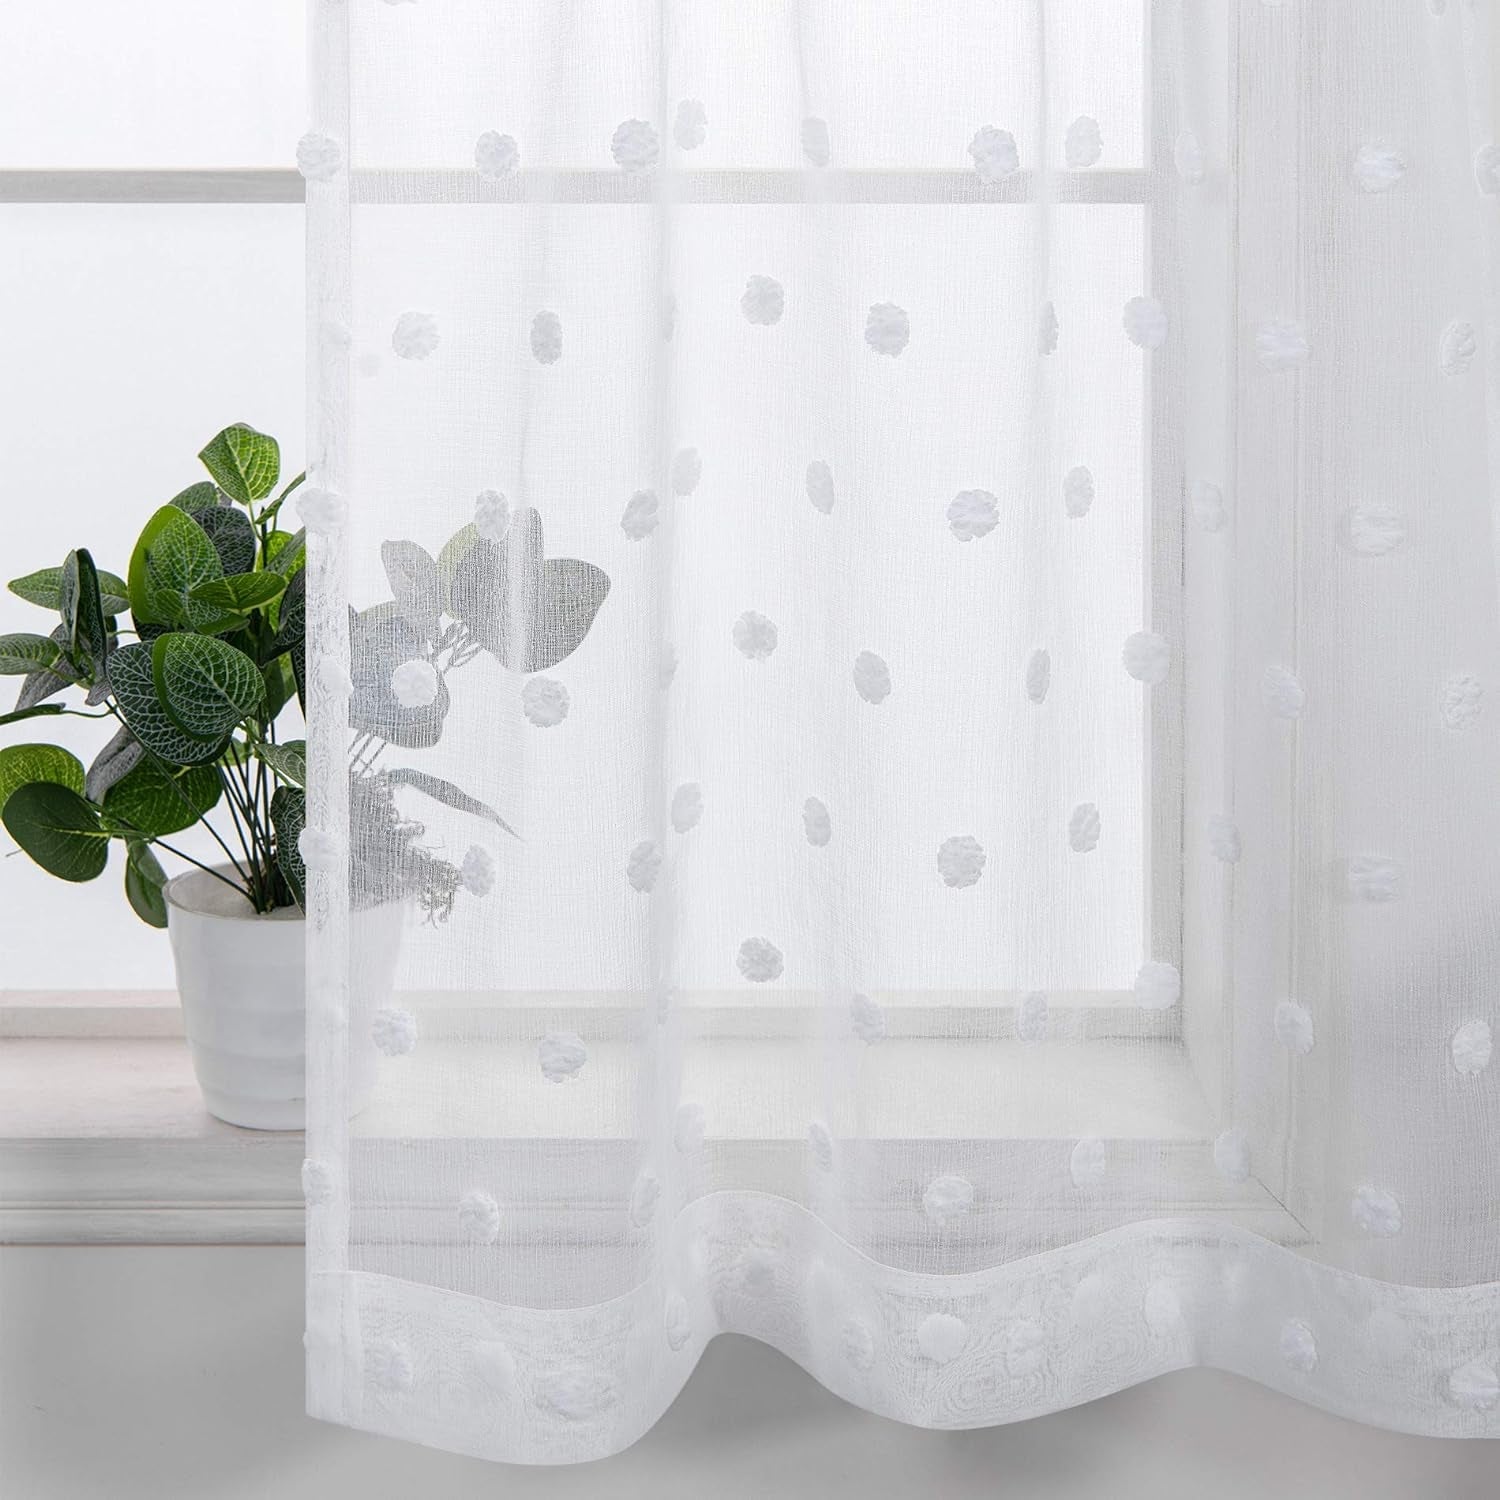 Country Kitchen Curtains 24 Inch Length for Small Windows Set 2 Pack Farmhouse Pocket Little Pom Textured Design Half Cafe Tier Valances Sheer Transparent White Short Lace Curtains for Bathroom Camper